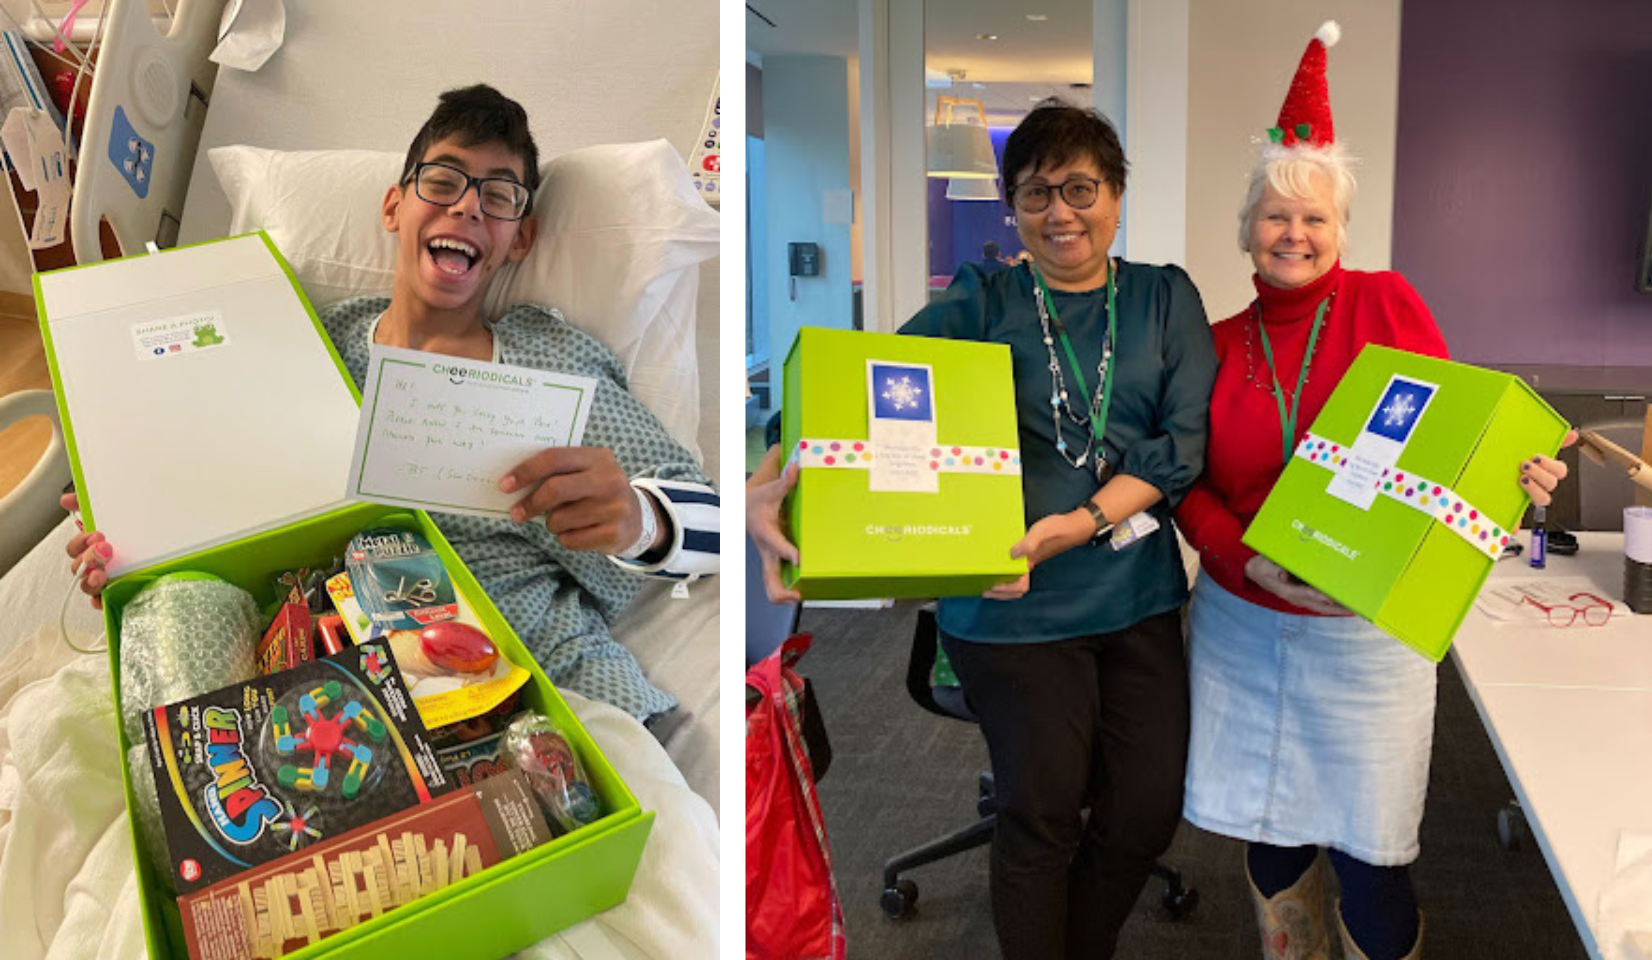 a young boy in a hospital bed smiles big as he opens his green cheeriodicals box of toys. Two women pose and smile as they hold up christmas themed cheeriodicals boxes for kids